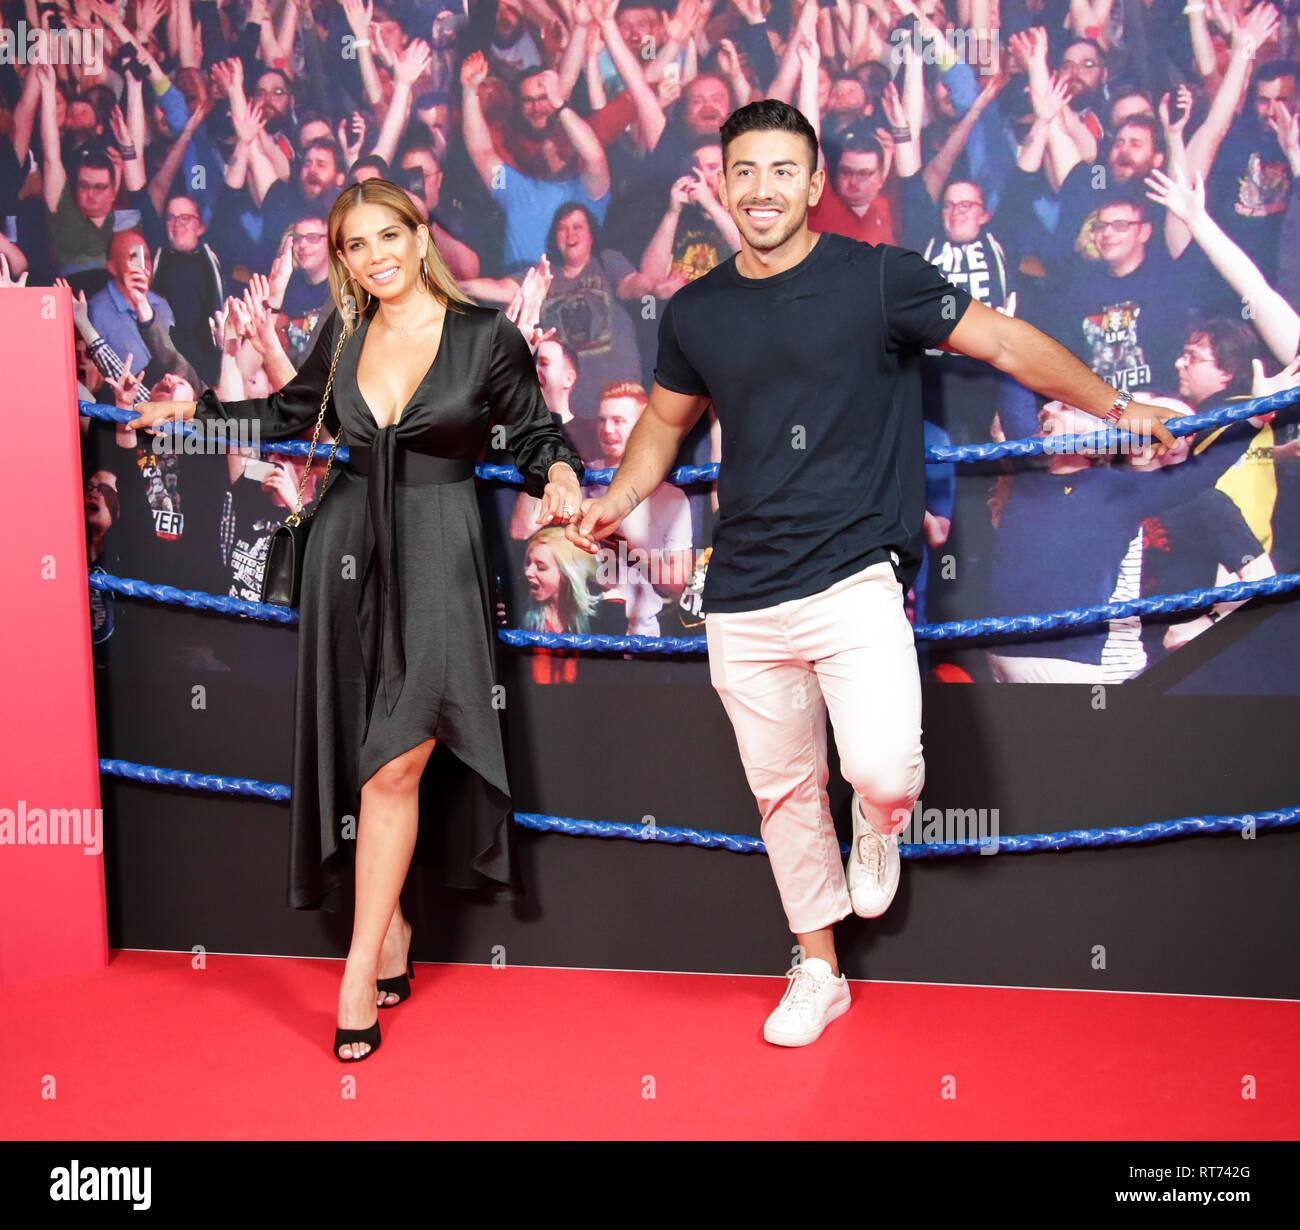 Ellie Gonsalves, Brisbane based actress and model (Dress: Rachel Gilbert,  Shoes: Christian Louboutin, Styled By: Lana Wilkinson) attends the premiere  of Fighting With My Family at Event Cinemas George Street. Sydney, Australia